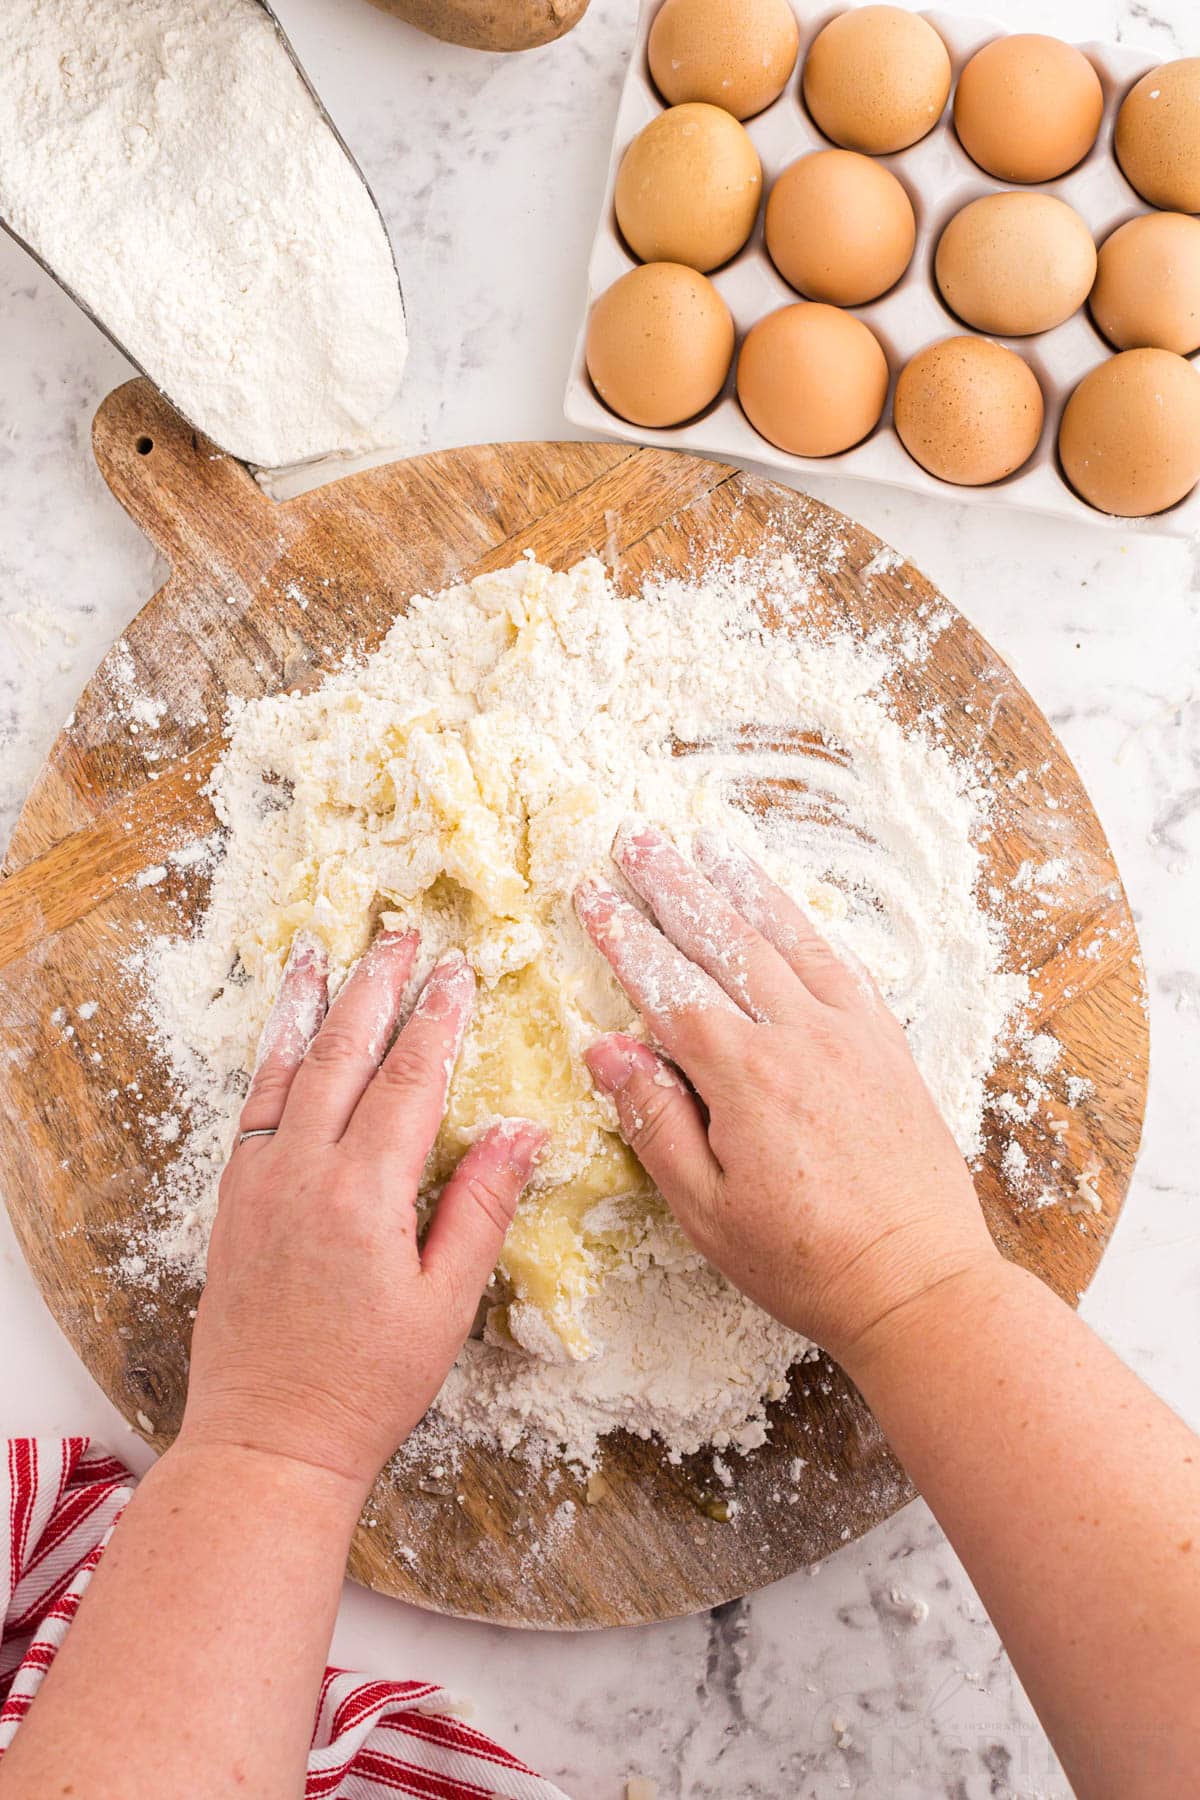 Hands mixing the mashed potato mixture with flour on a wooden kitchen board, tray of eggs, measuring spoon with flour, red and white striped linen, on a marble countertop.